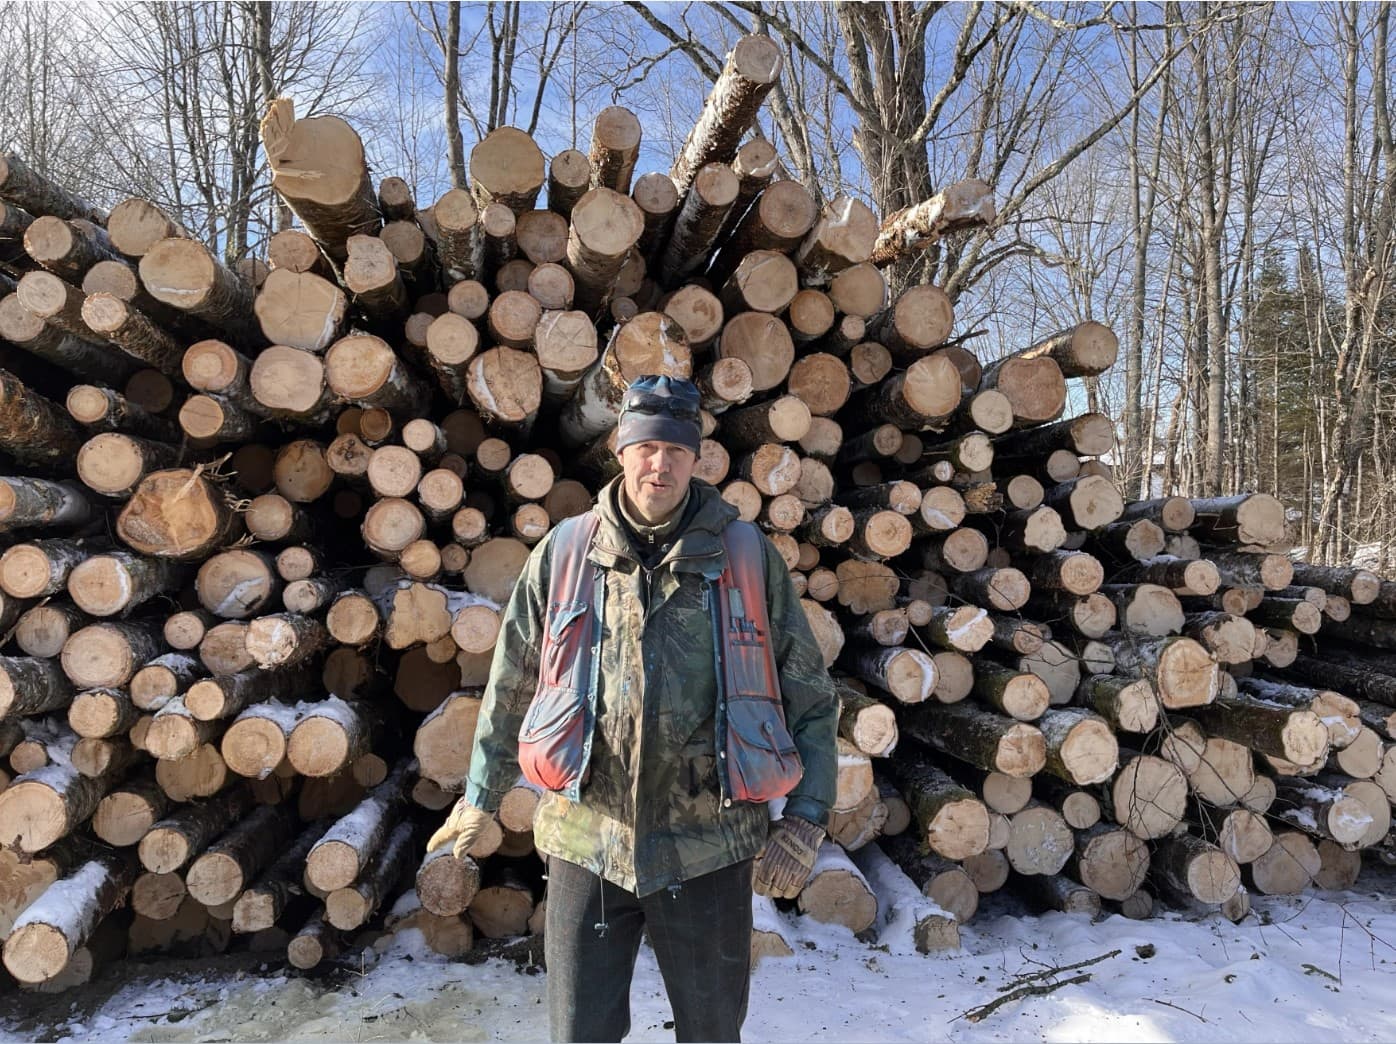 Forester David Senio, standing in front of a pile of balsam fir logs, said responsibly managing forests can make them healthier in the long run. (Henry Epp/Vermont Public)